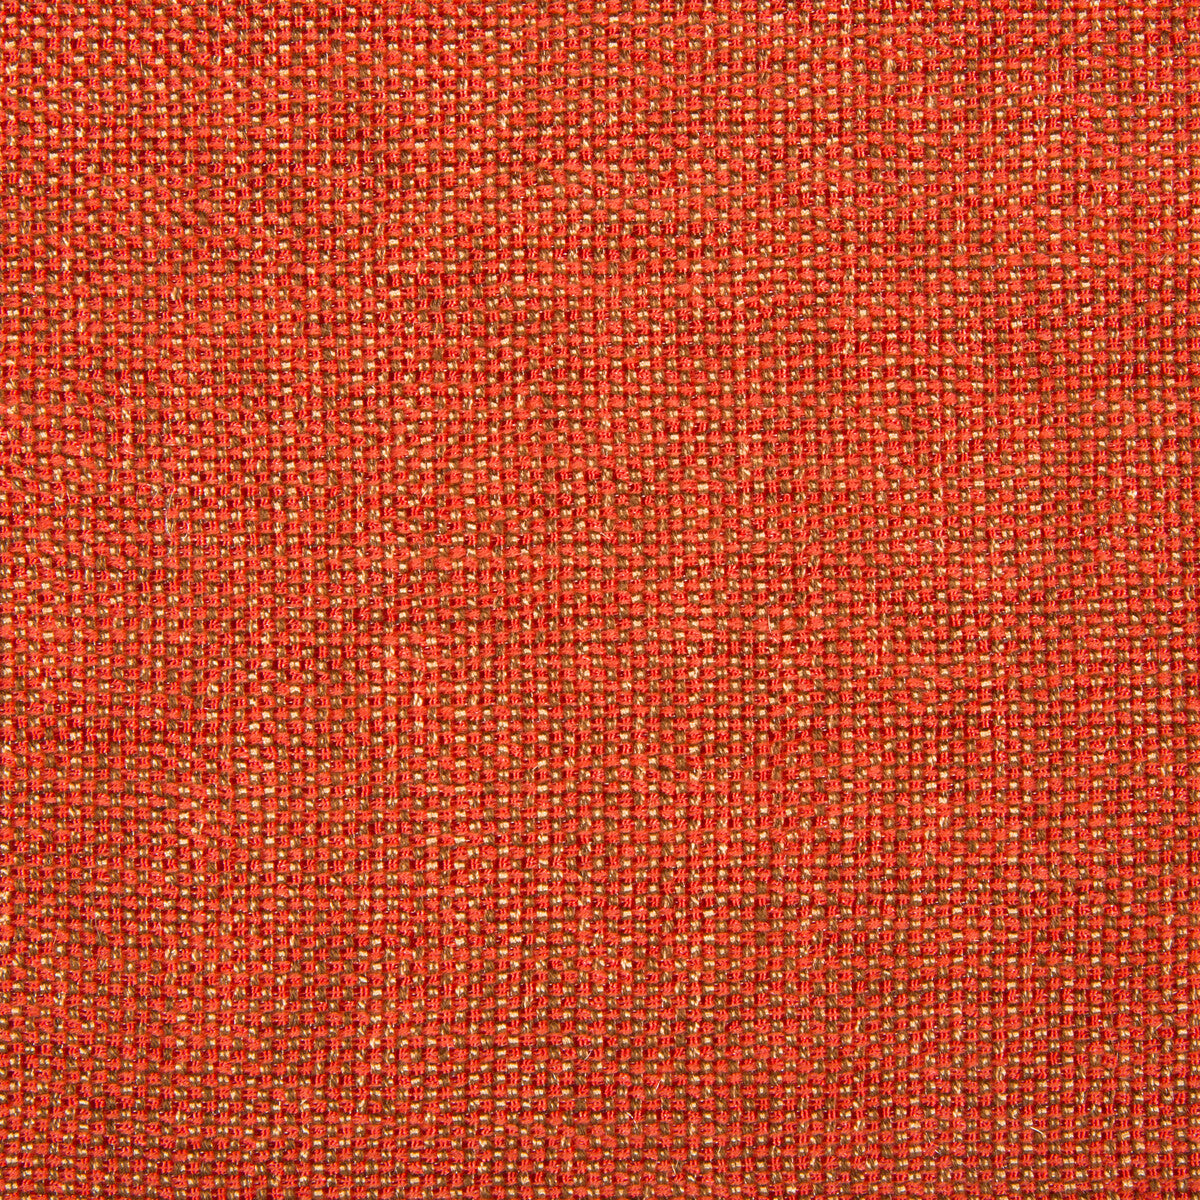 Kravet Contract fabric in 34926-612 color - pattern 34926.612.0 - by Kravet Contract